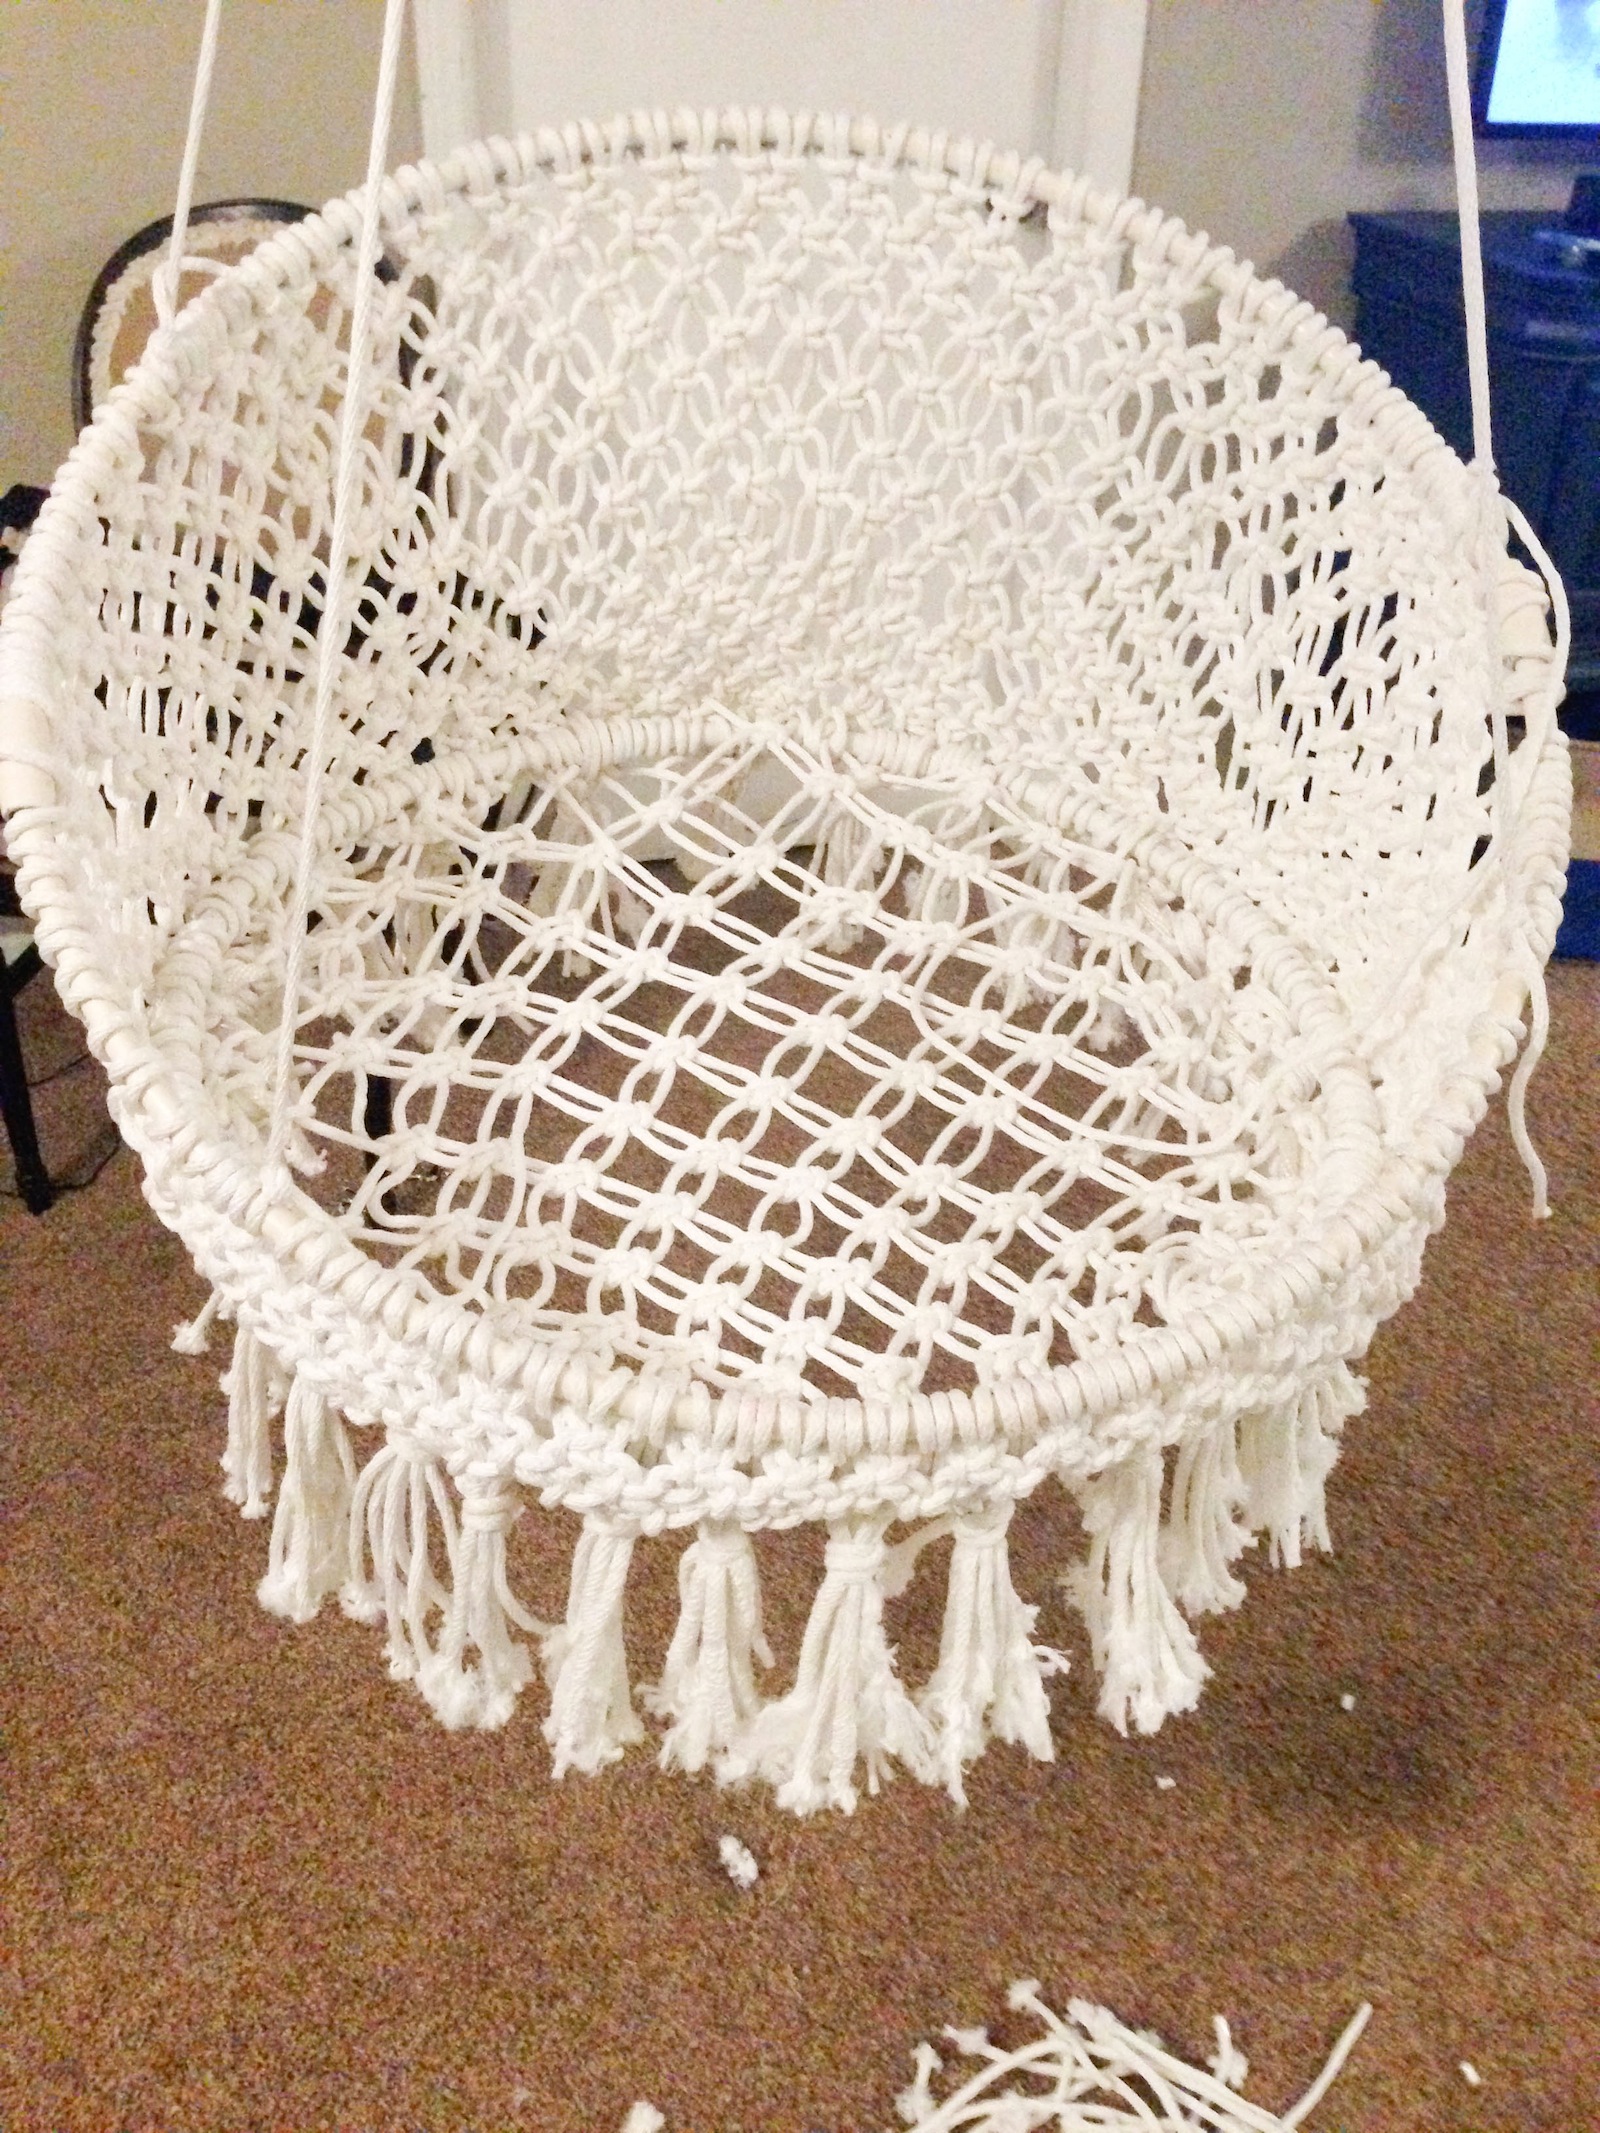 Macrame Hanging Chair and other amazing macrame tutorials!